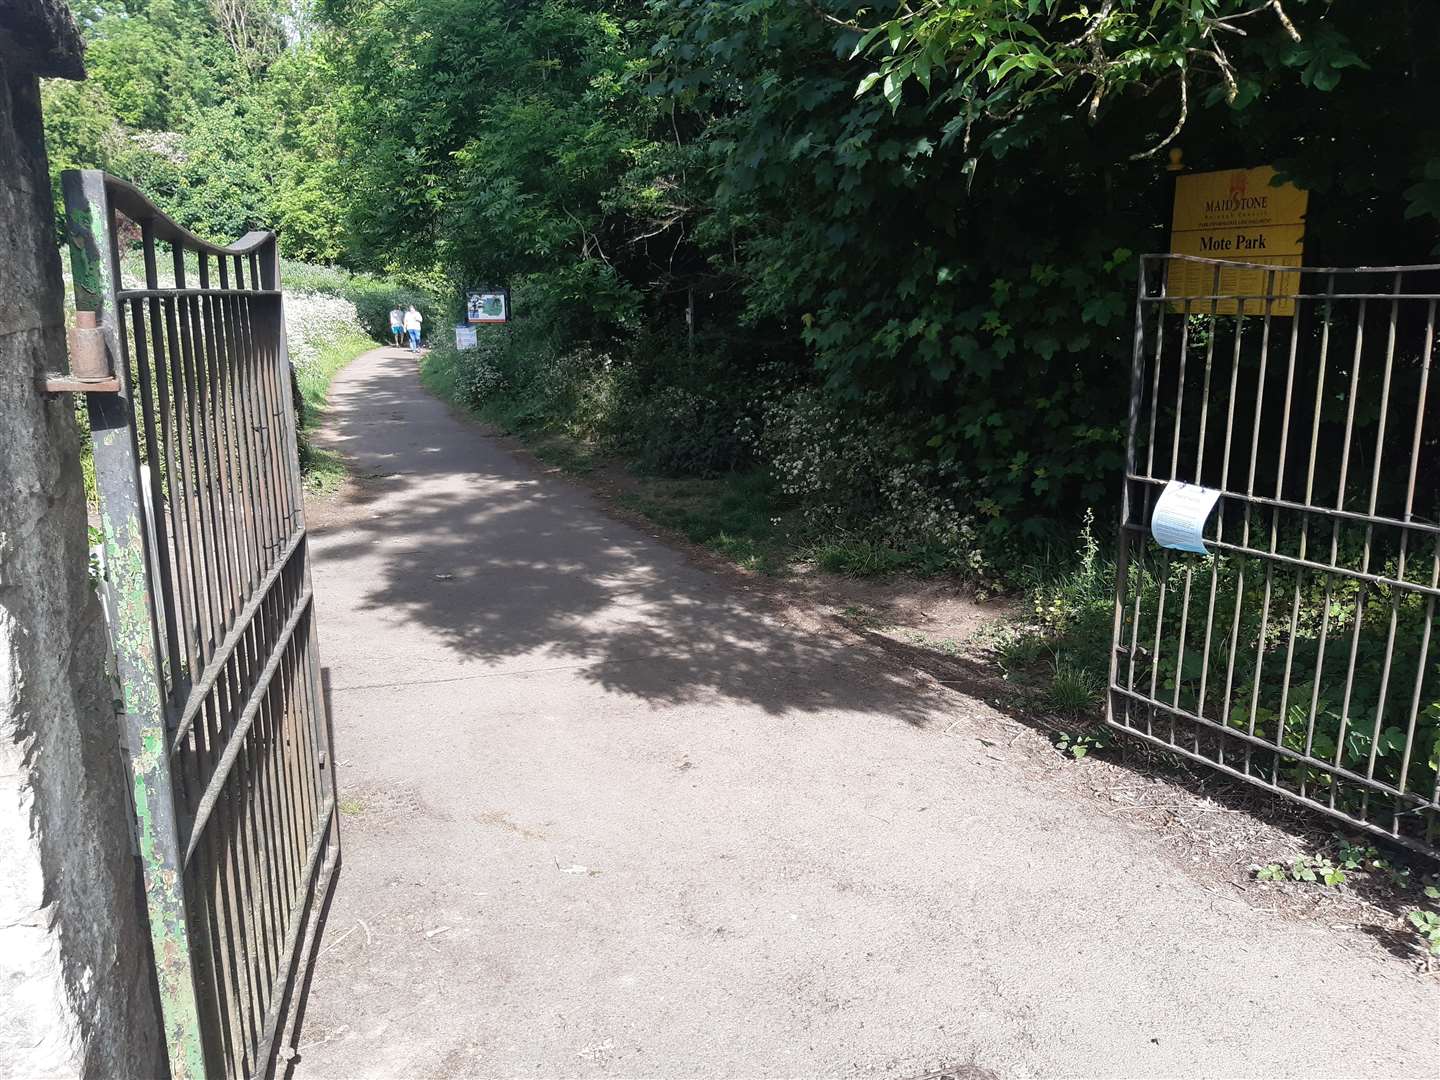 The junction of Dering Wood Drive and Willington Street in Maidstone, by an entrance to Mote Park